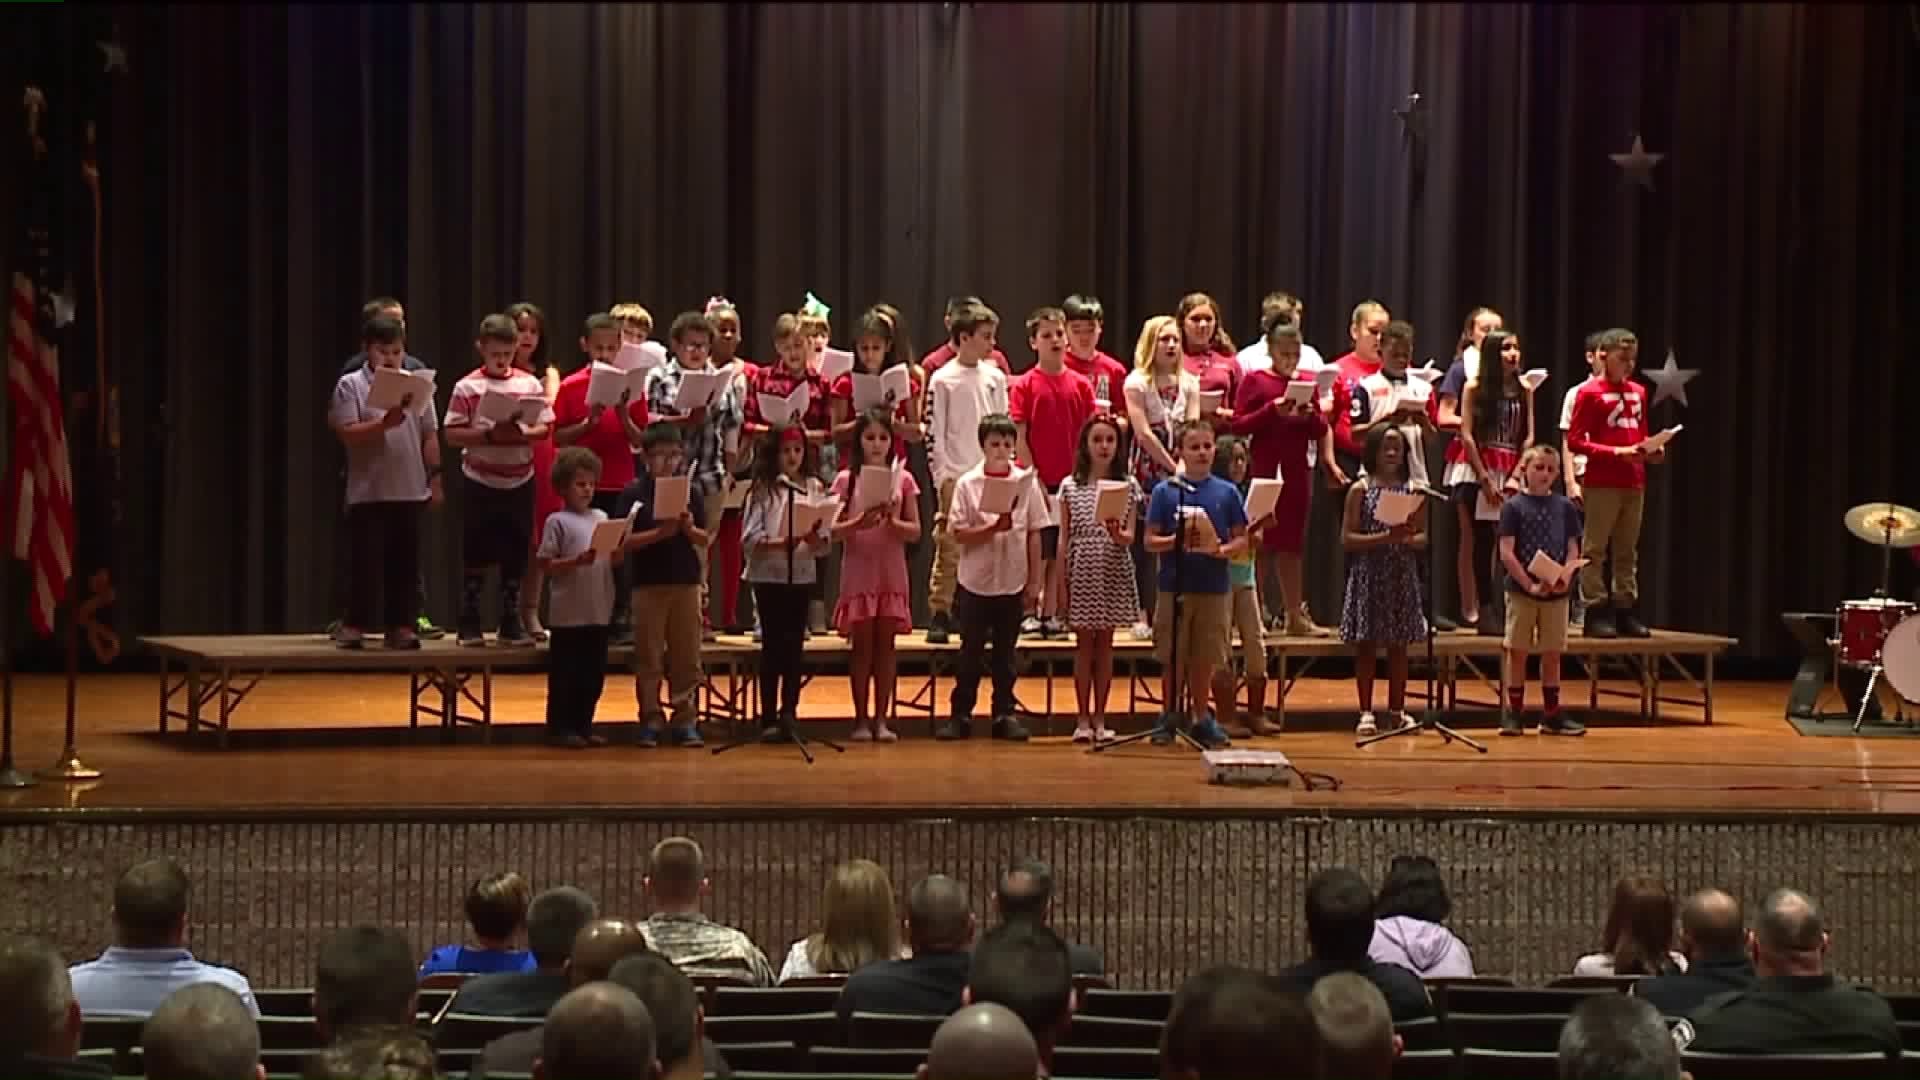 First Responders, Veterans Treated to 'Thank You' Concert by Elementary Students